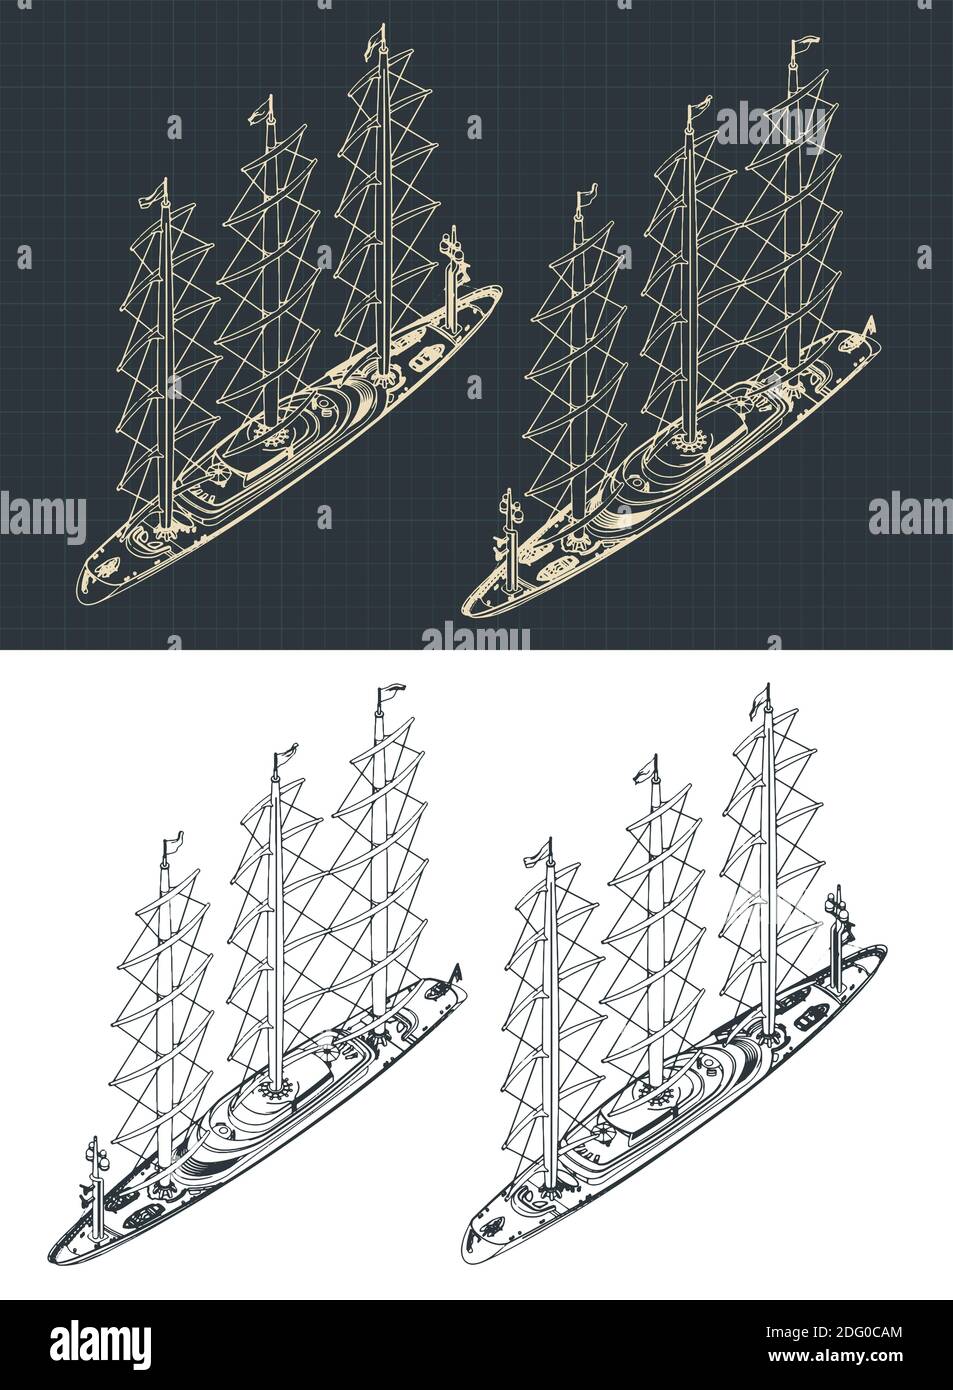 Stylized vector illustration of a large modern three-masted sailing ship isometric drawings with the sails down Stock Vector